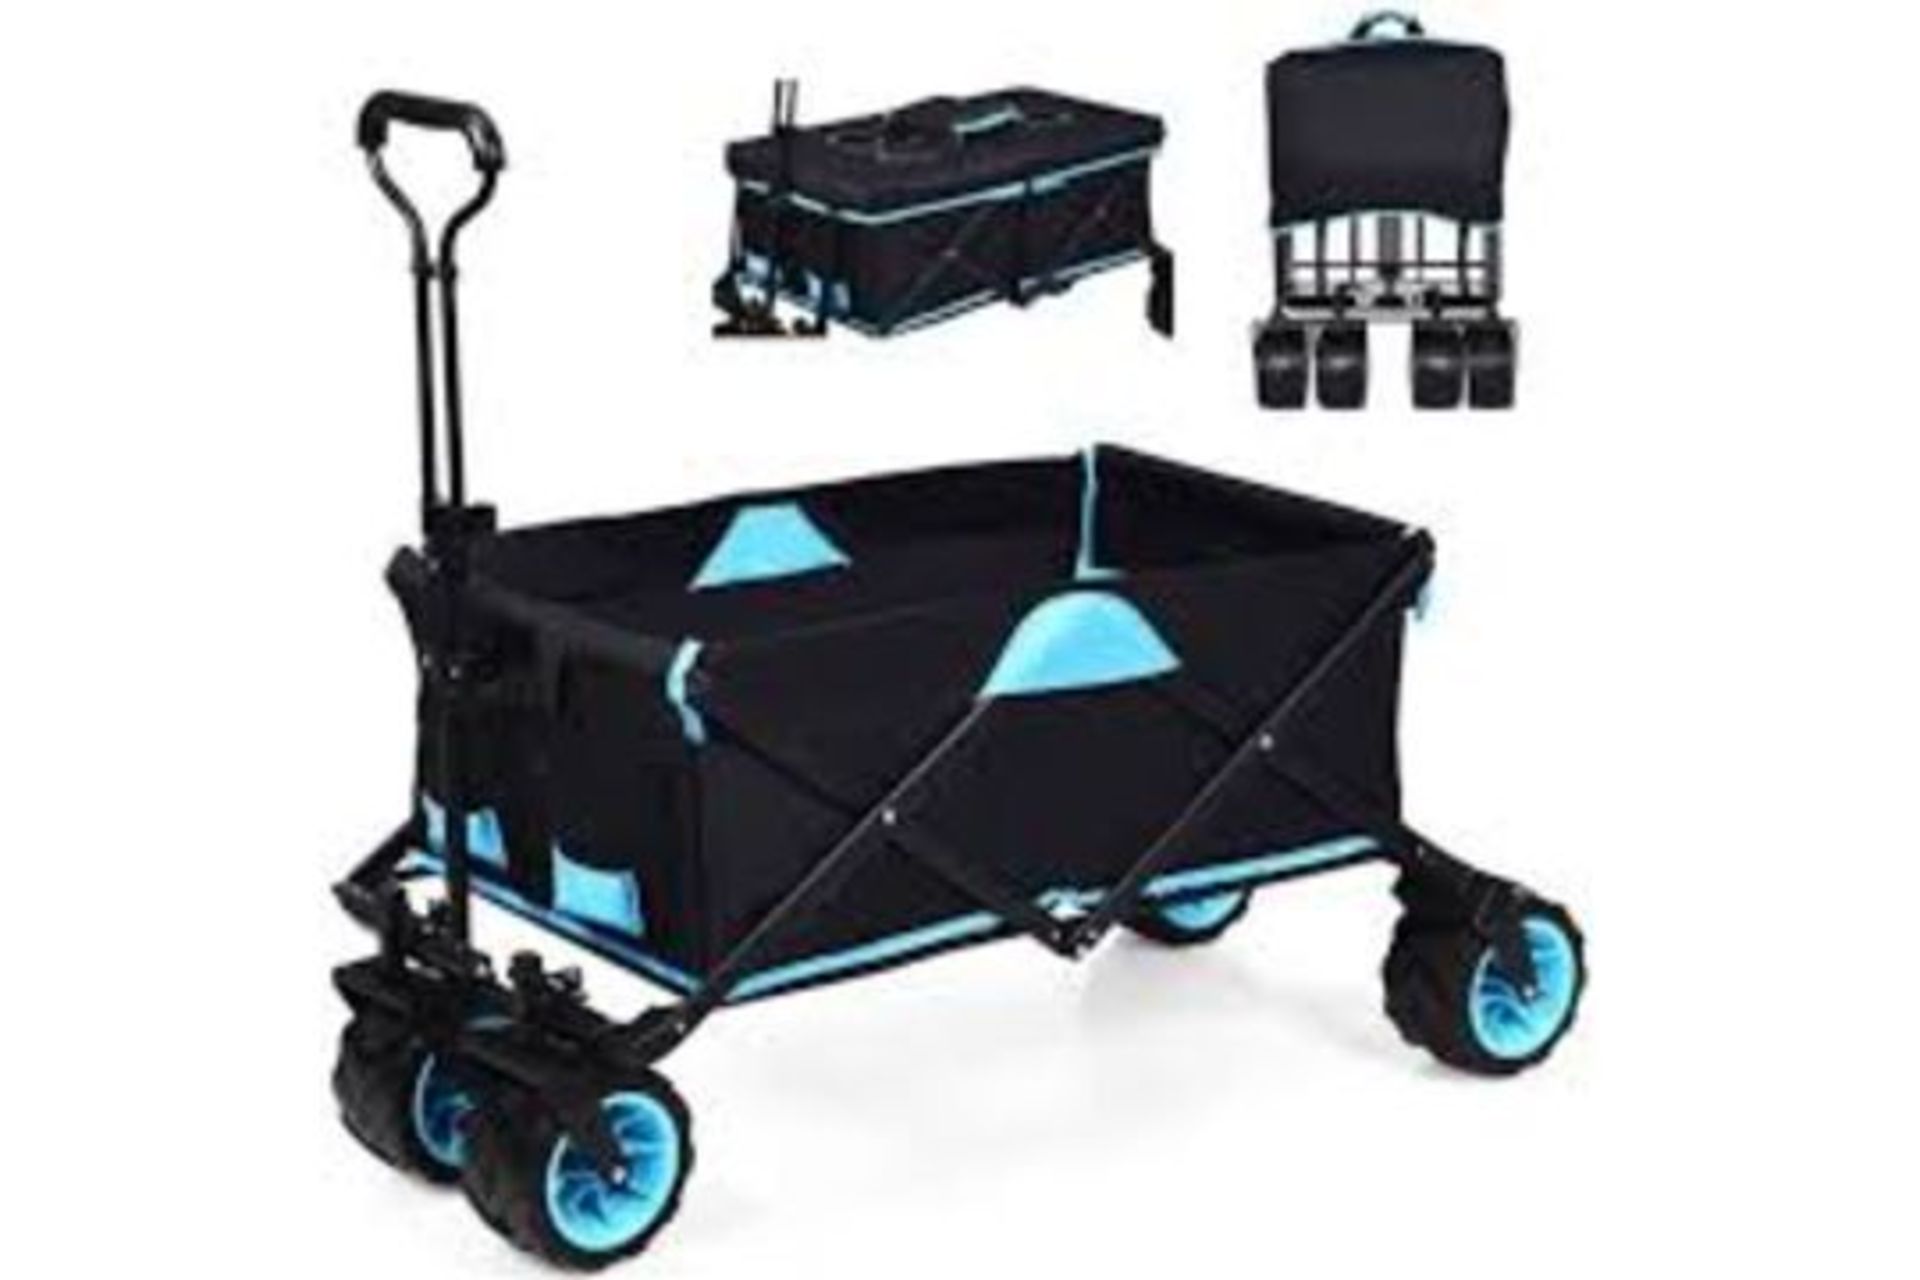 Folding Wagon Cart with Top Cover and Cup Holders. - R14.10. The folding wagon cart is equipped with